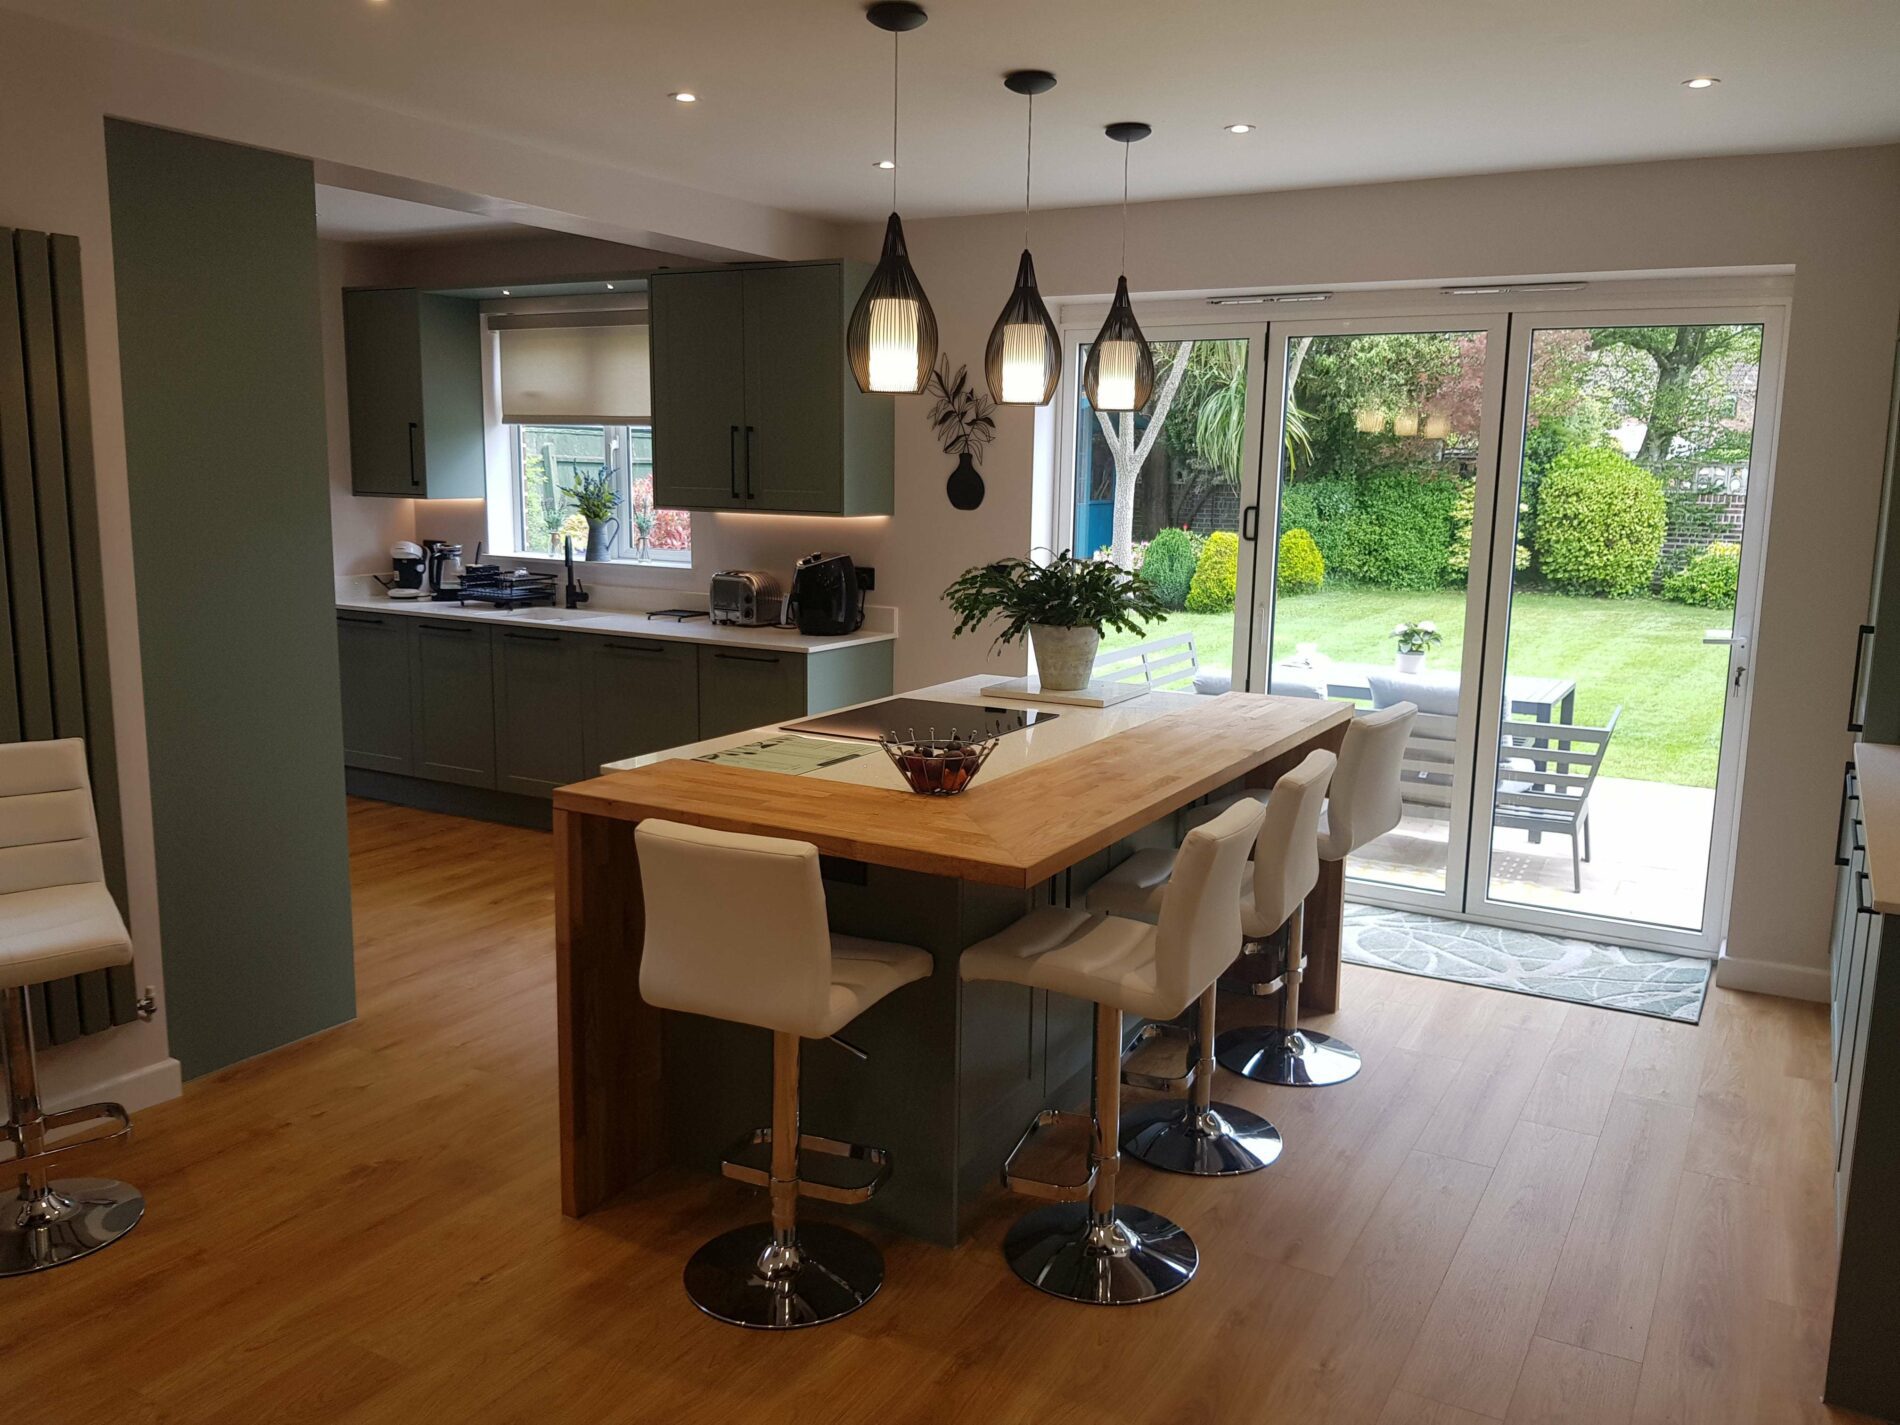 Kitchen company in Talbot woods